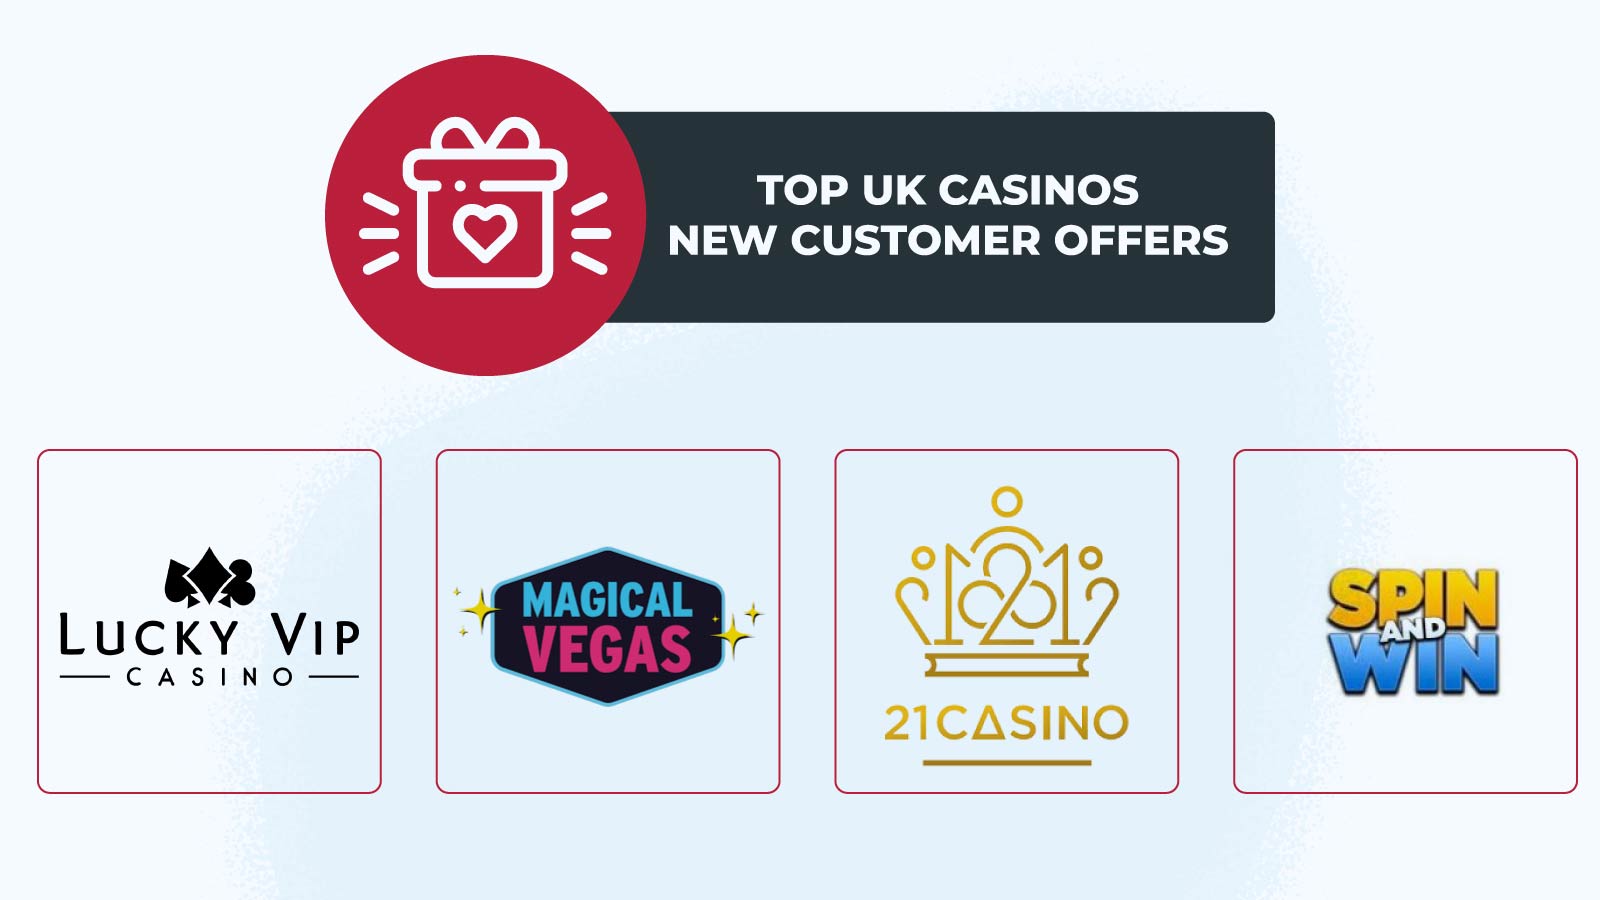 Top UK online casinos classified by their new customer offers